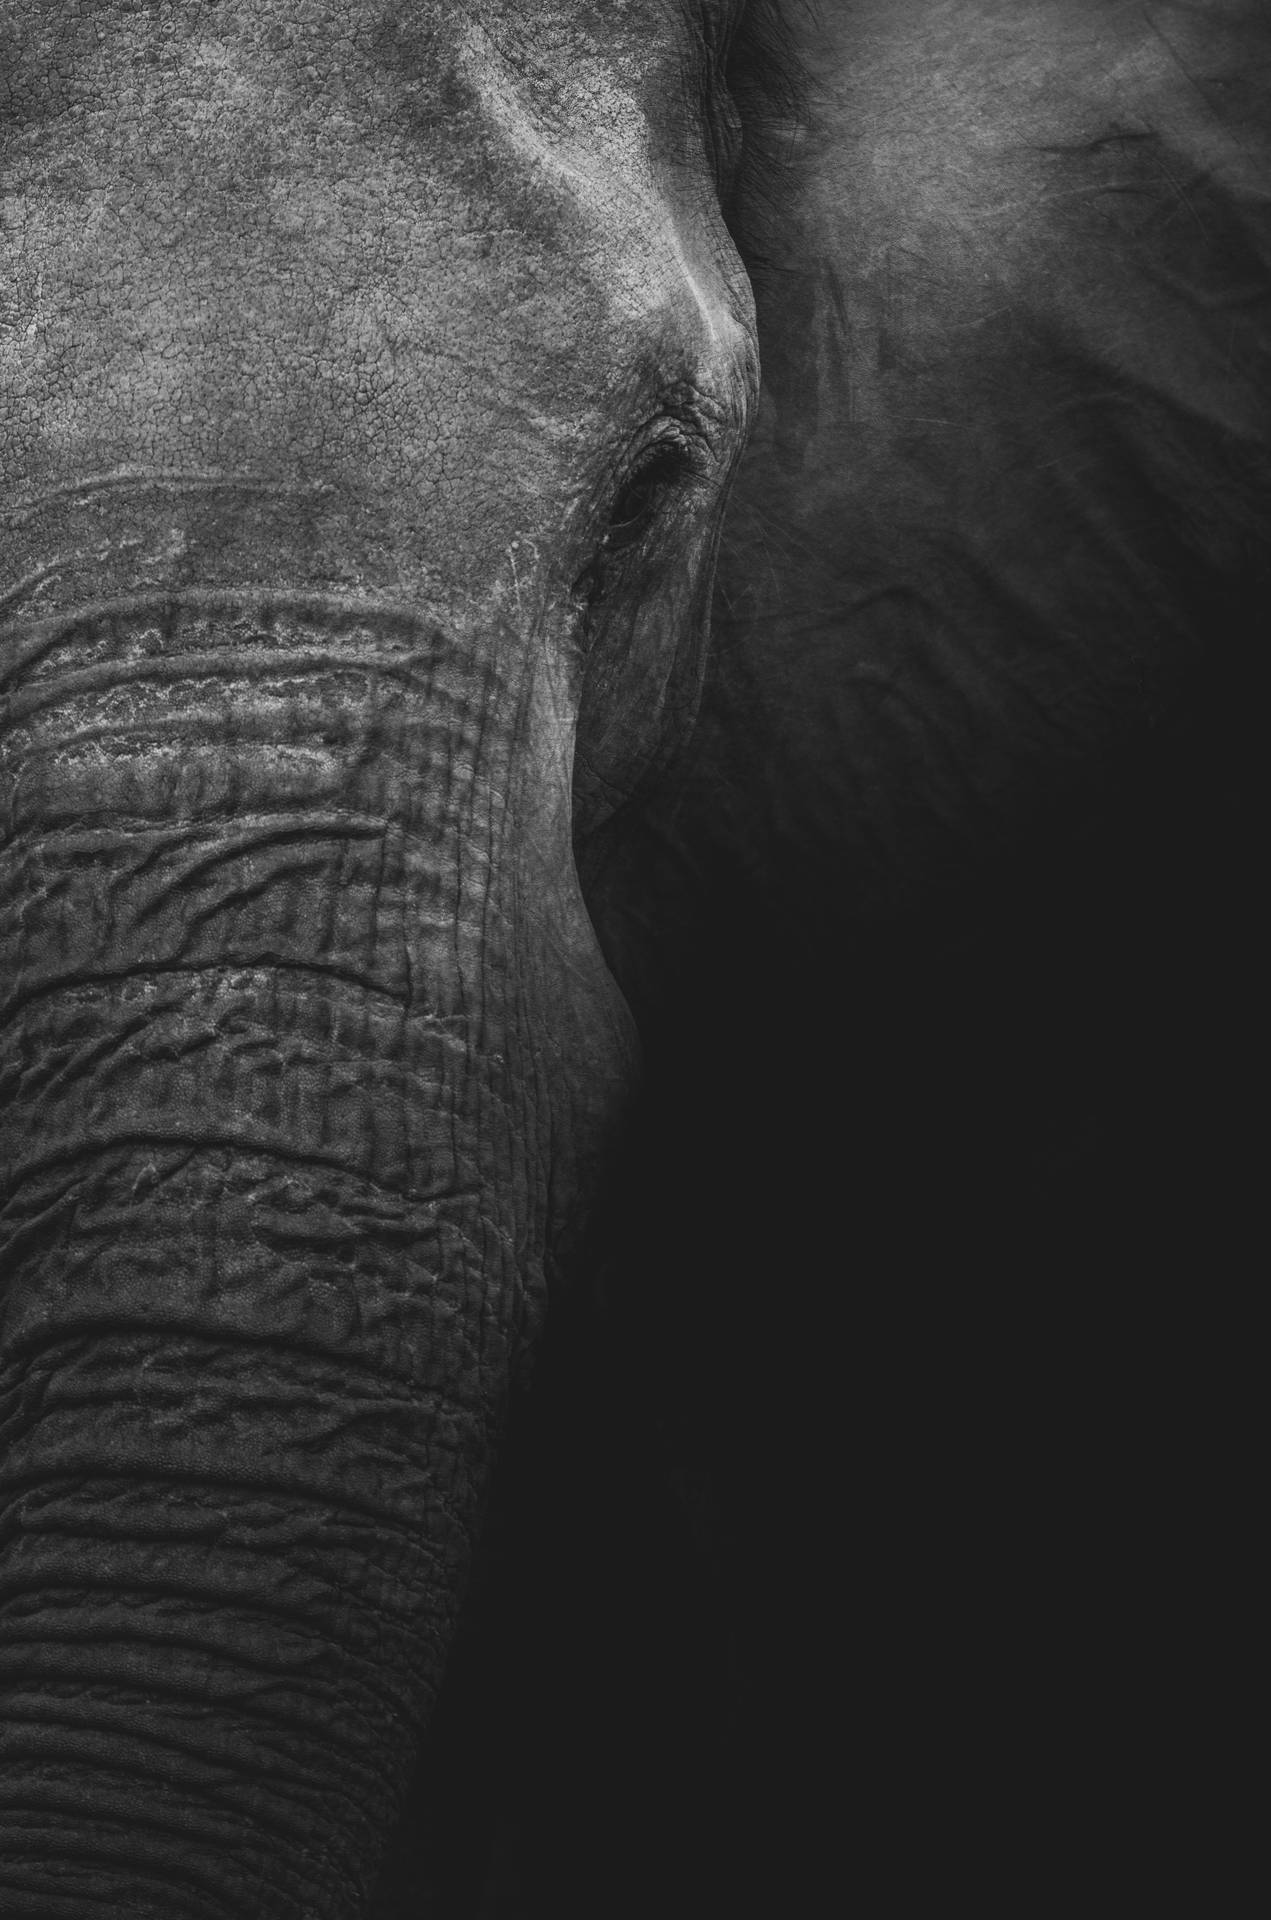 Top 999+ Elephant Iphone Wallpapers Full HD, 4K✅Free to Use